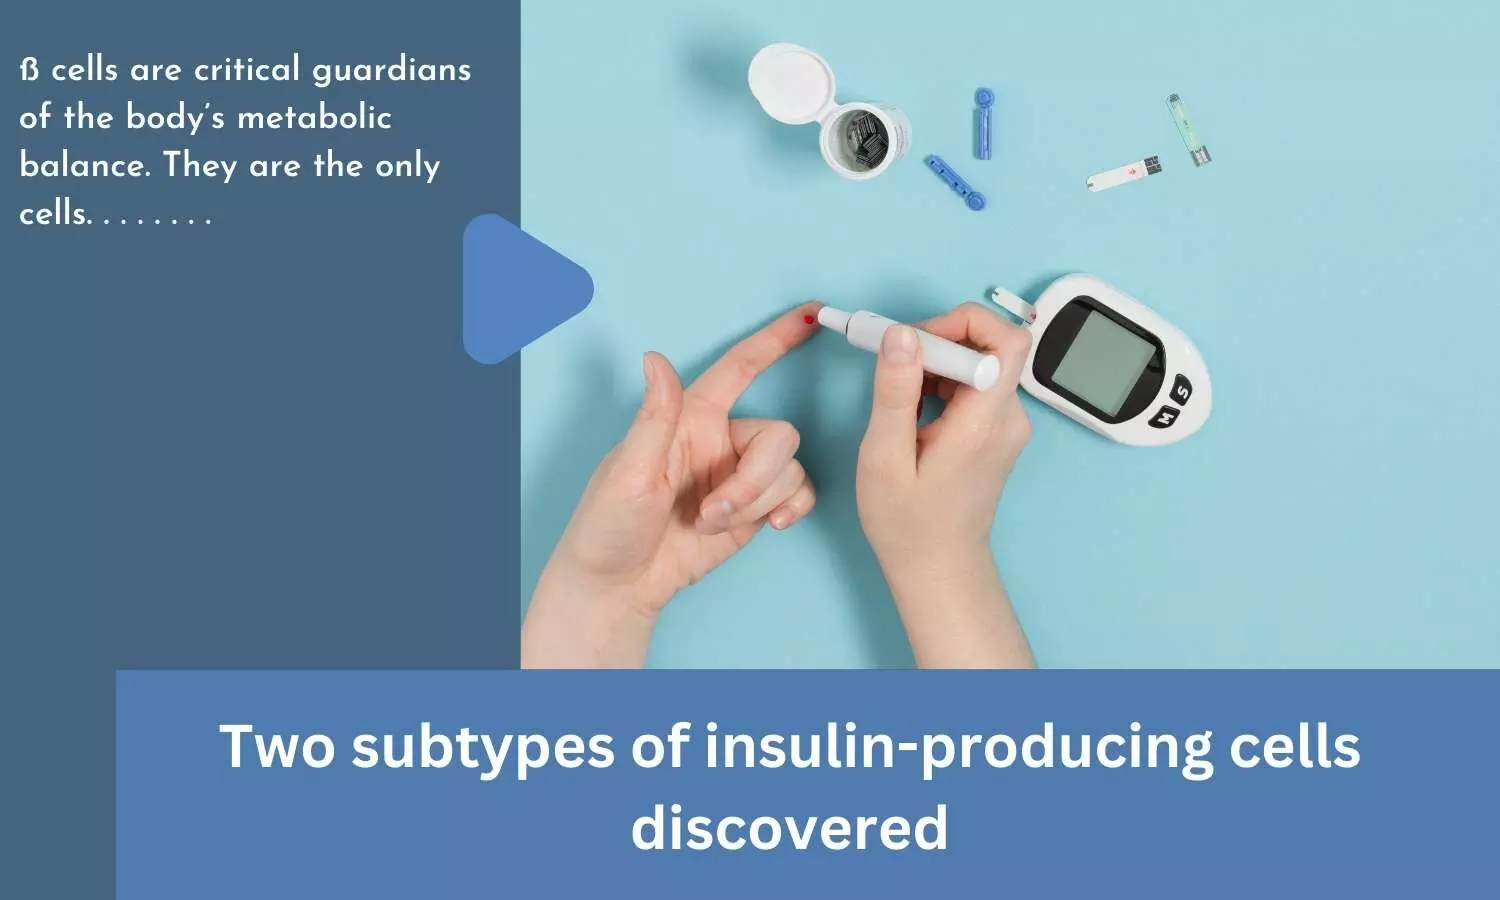 Two subtypes of insulin-producing cells discovered